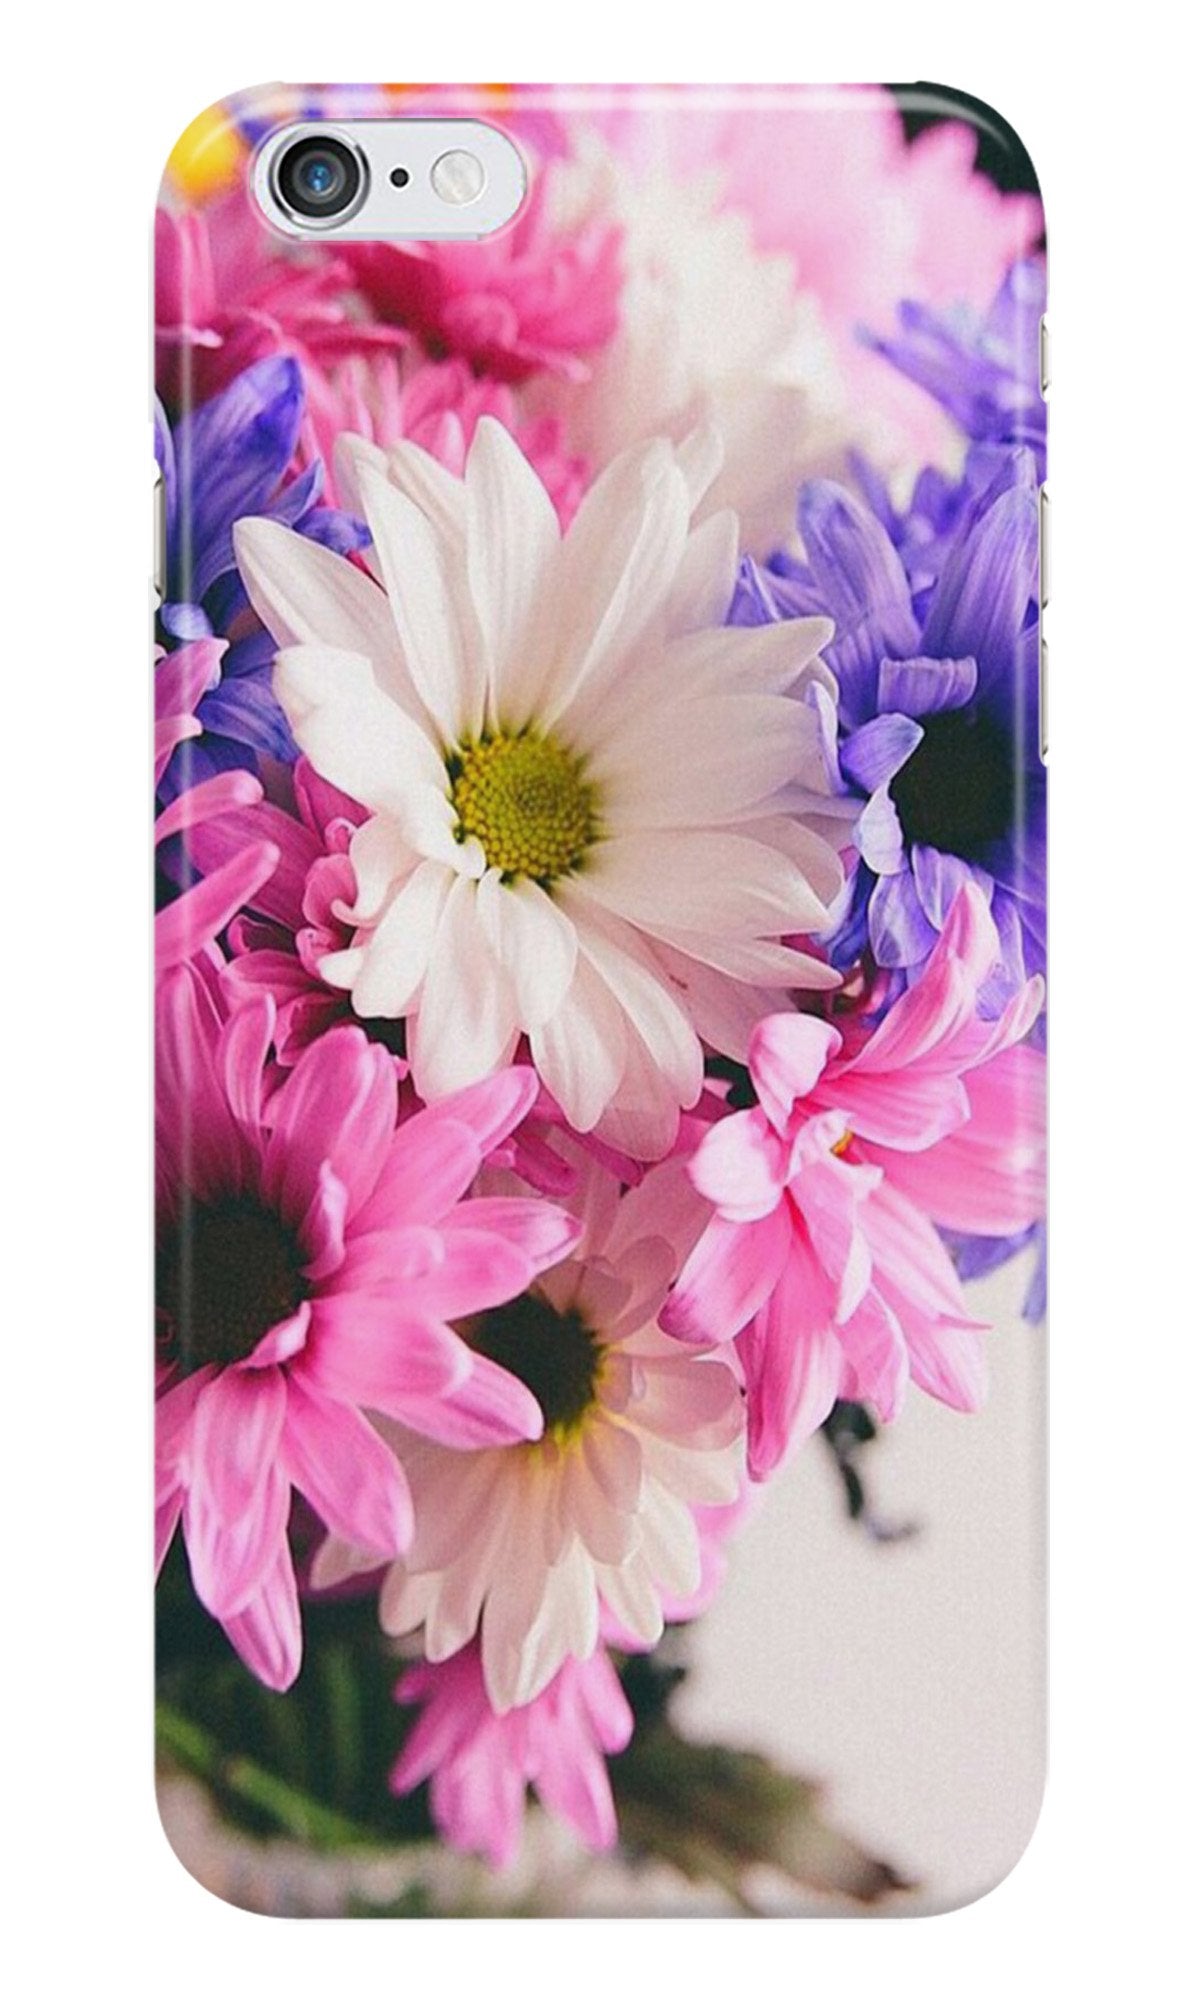 Coloful Daisy Case for iPhone 6 Plus/ 6s Plus